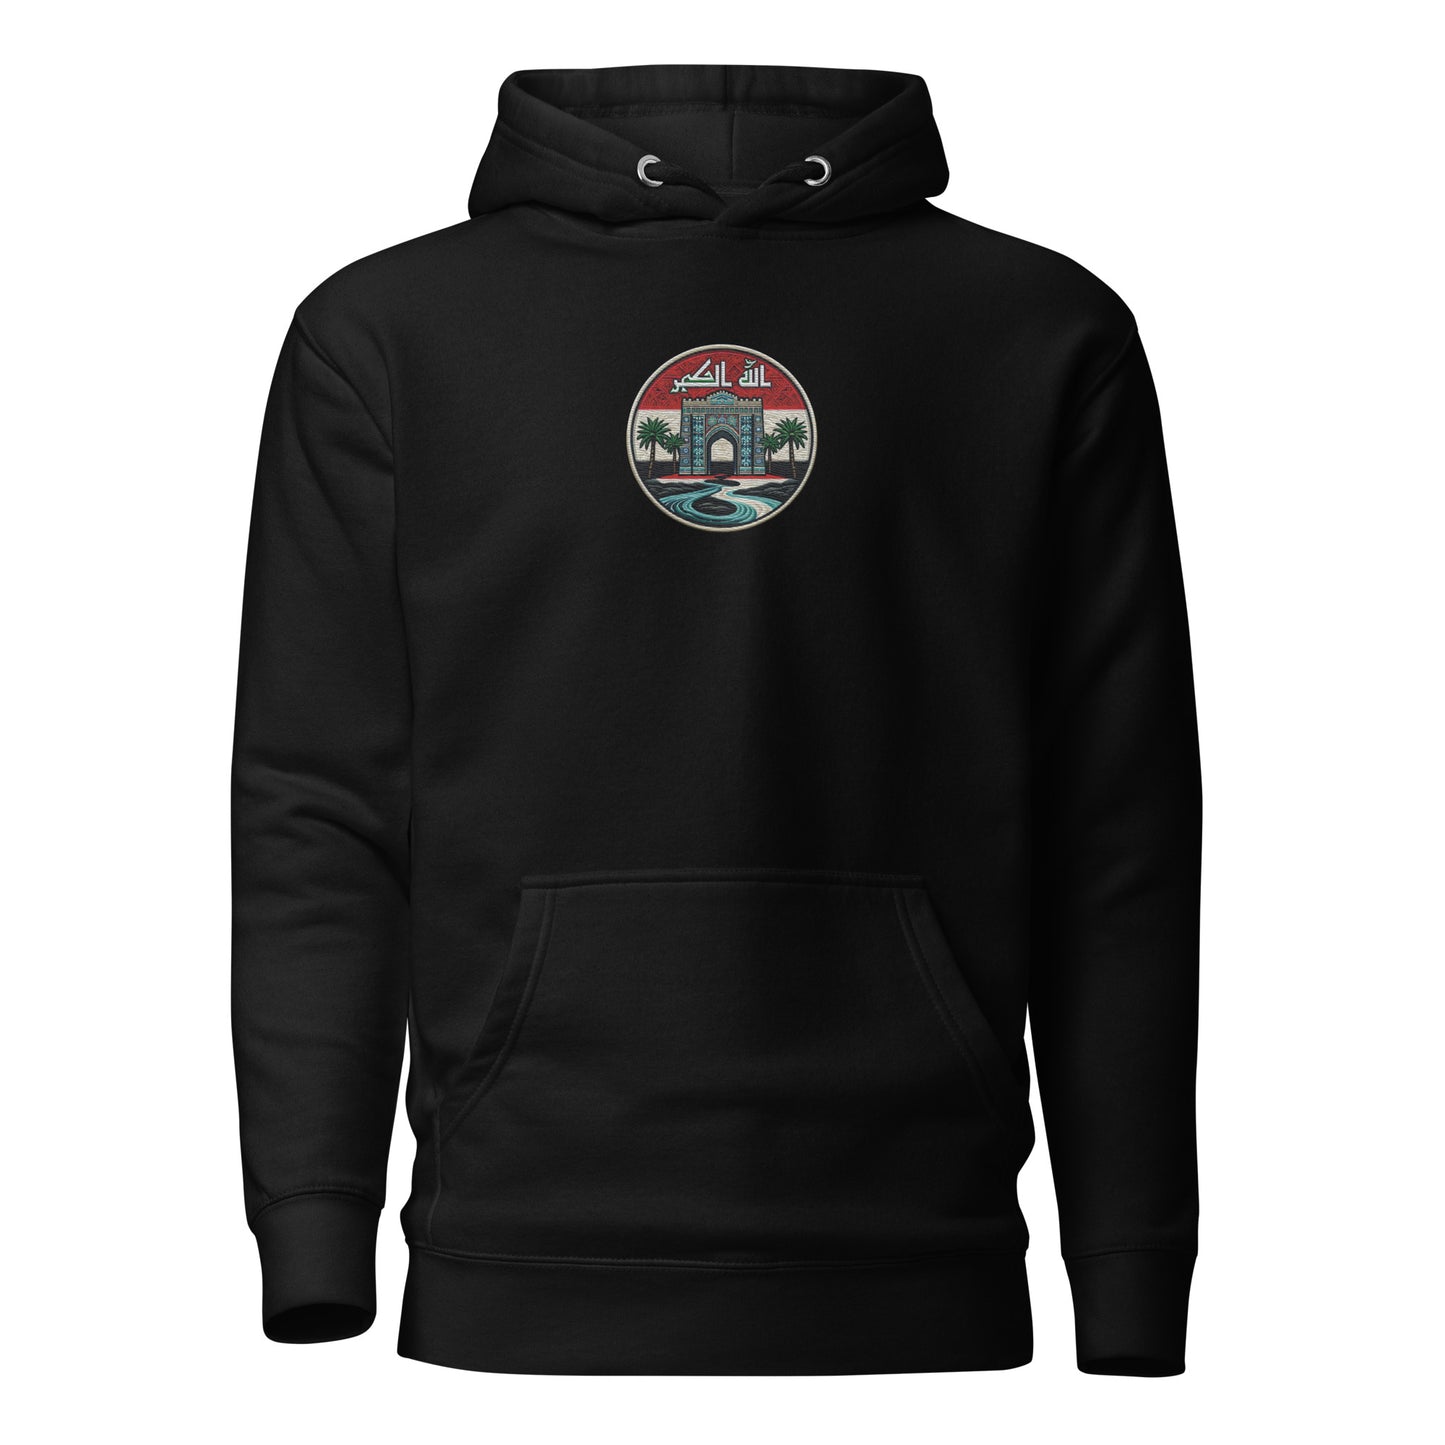 Iraqi Patch 001 Hoodie By Halal Cultures